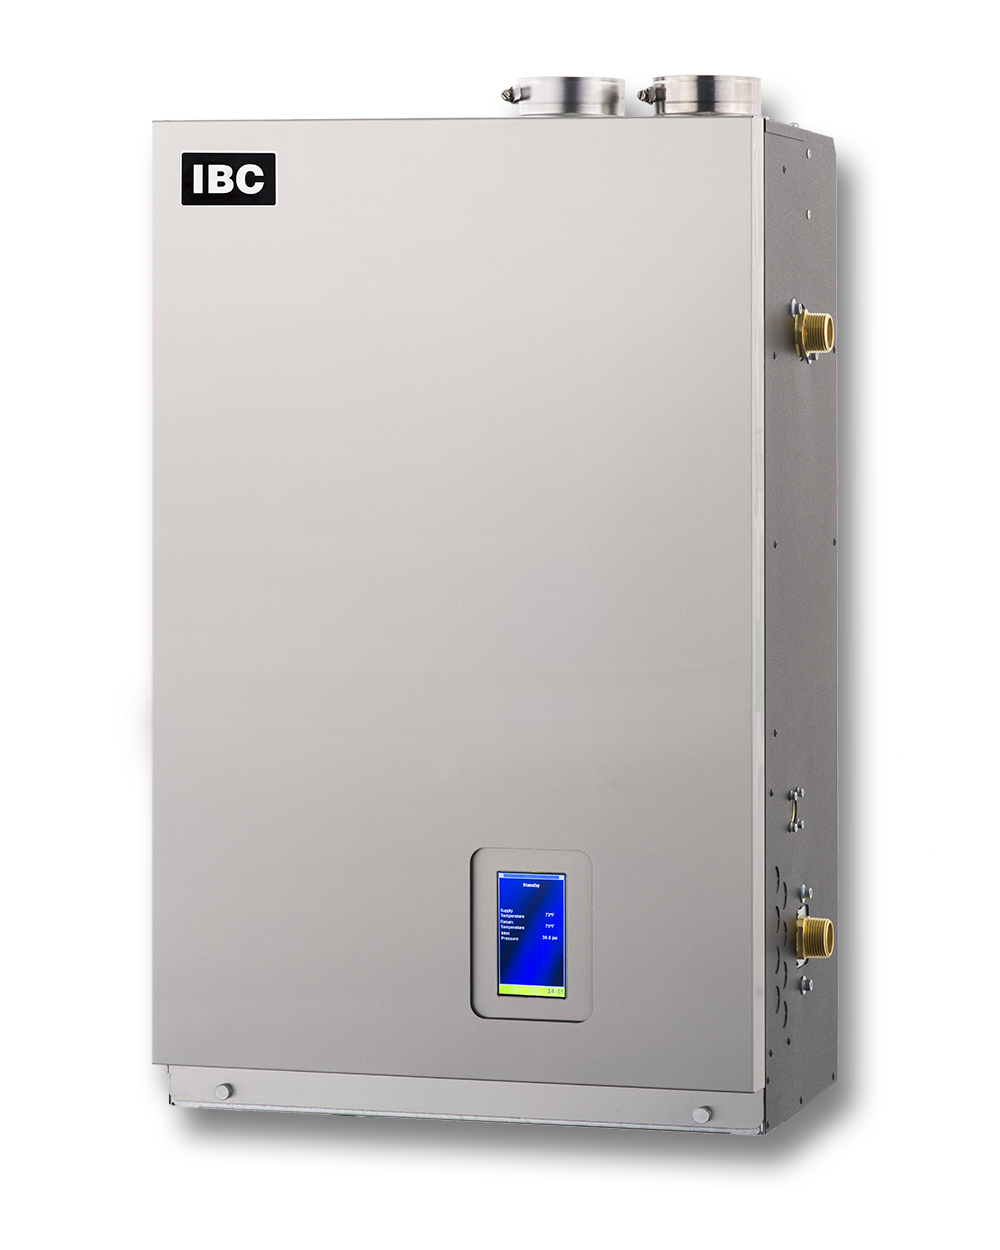 SL Series G3 Commercial and Residential Gas Boiler